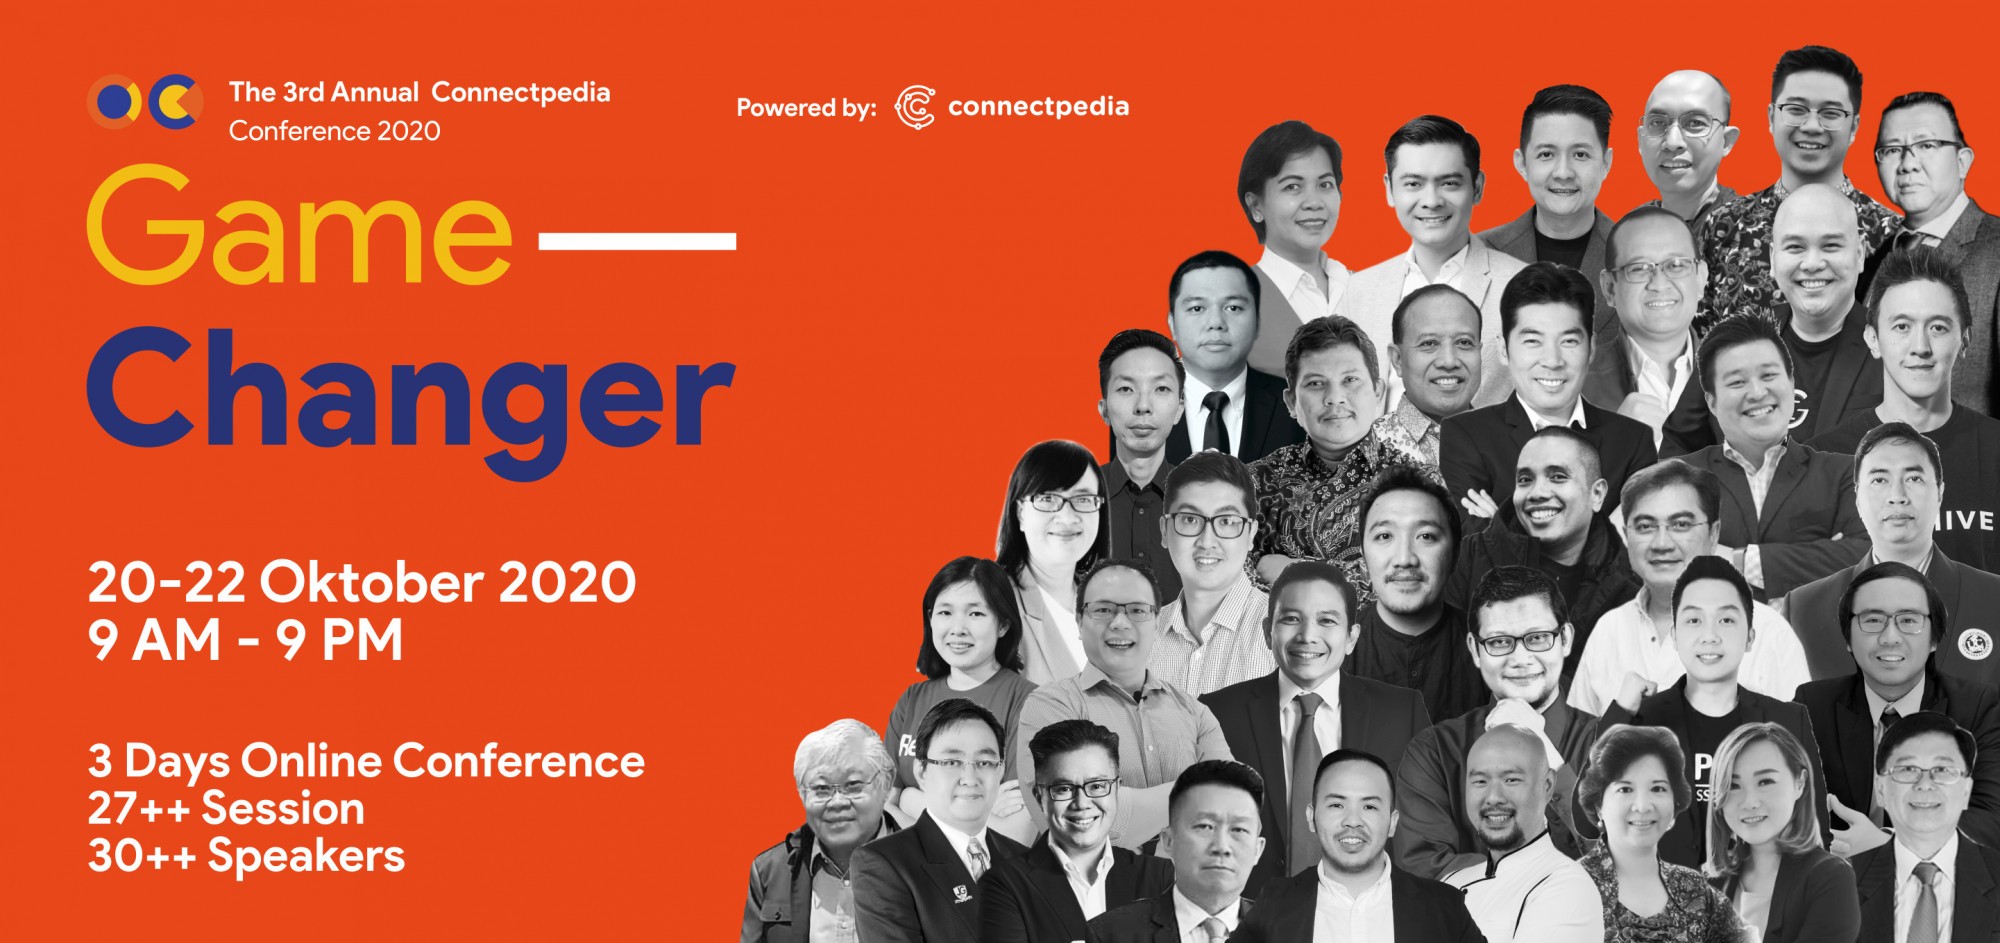 Connectpedia Conference 2020 Game Changer